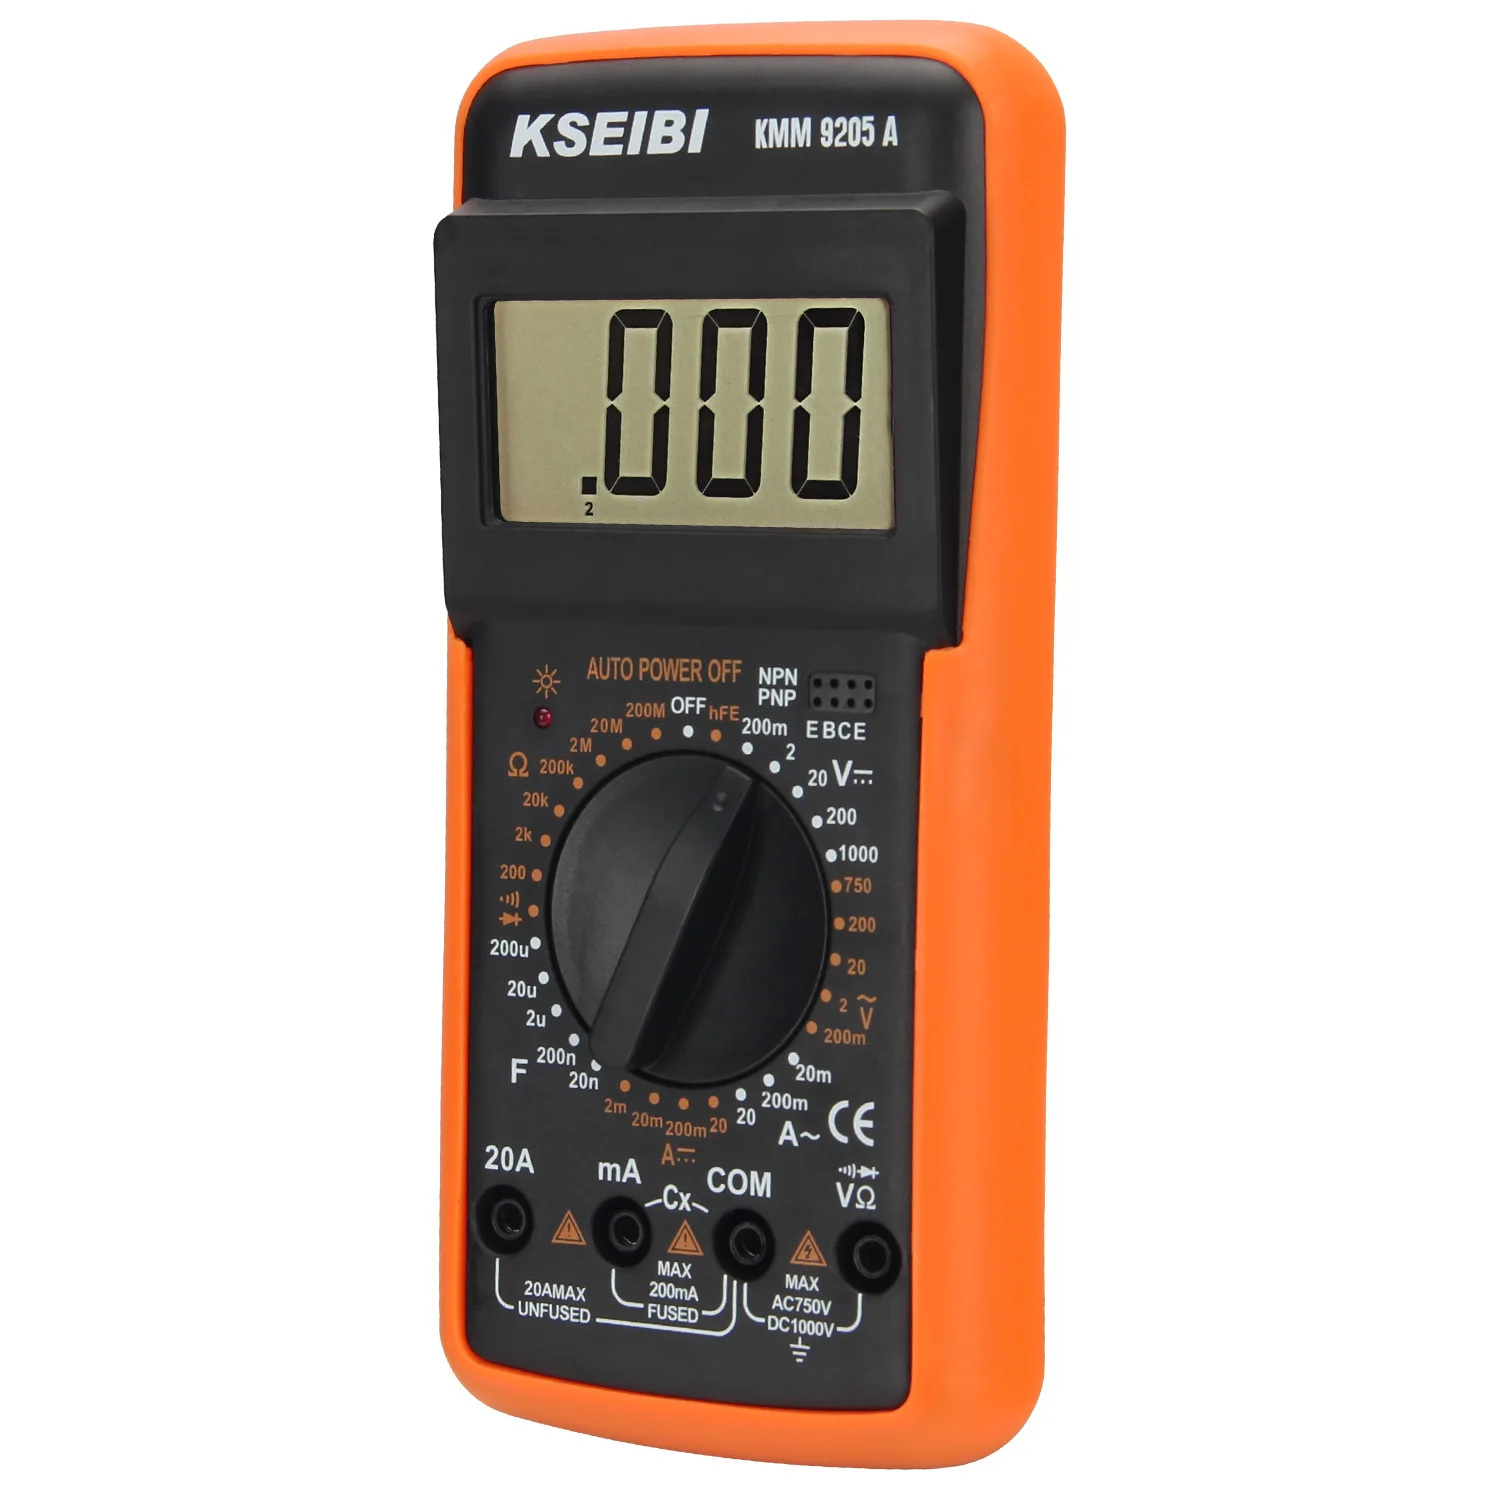 
KSEIBI Professional Voltage Tester LCD Screen With Capacity 12V  (1700007447762)